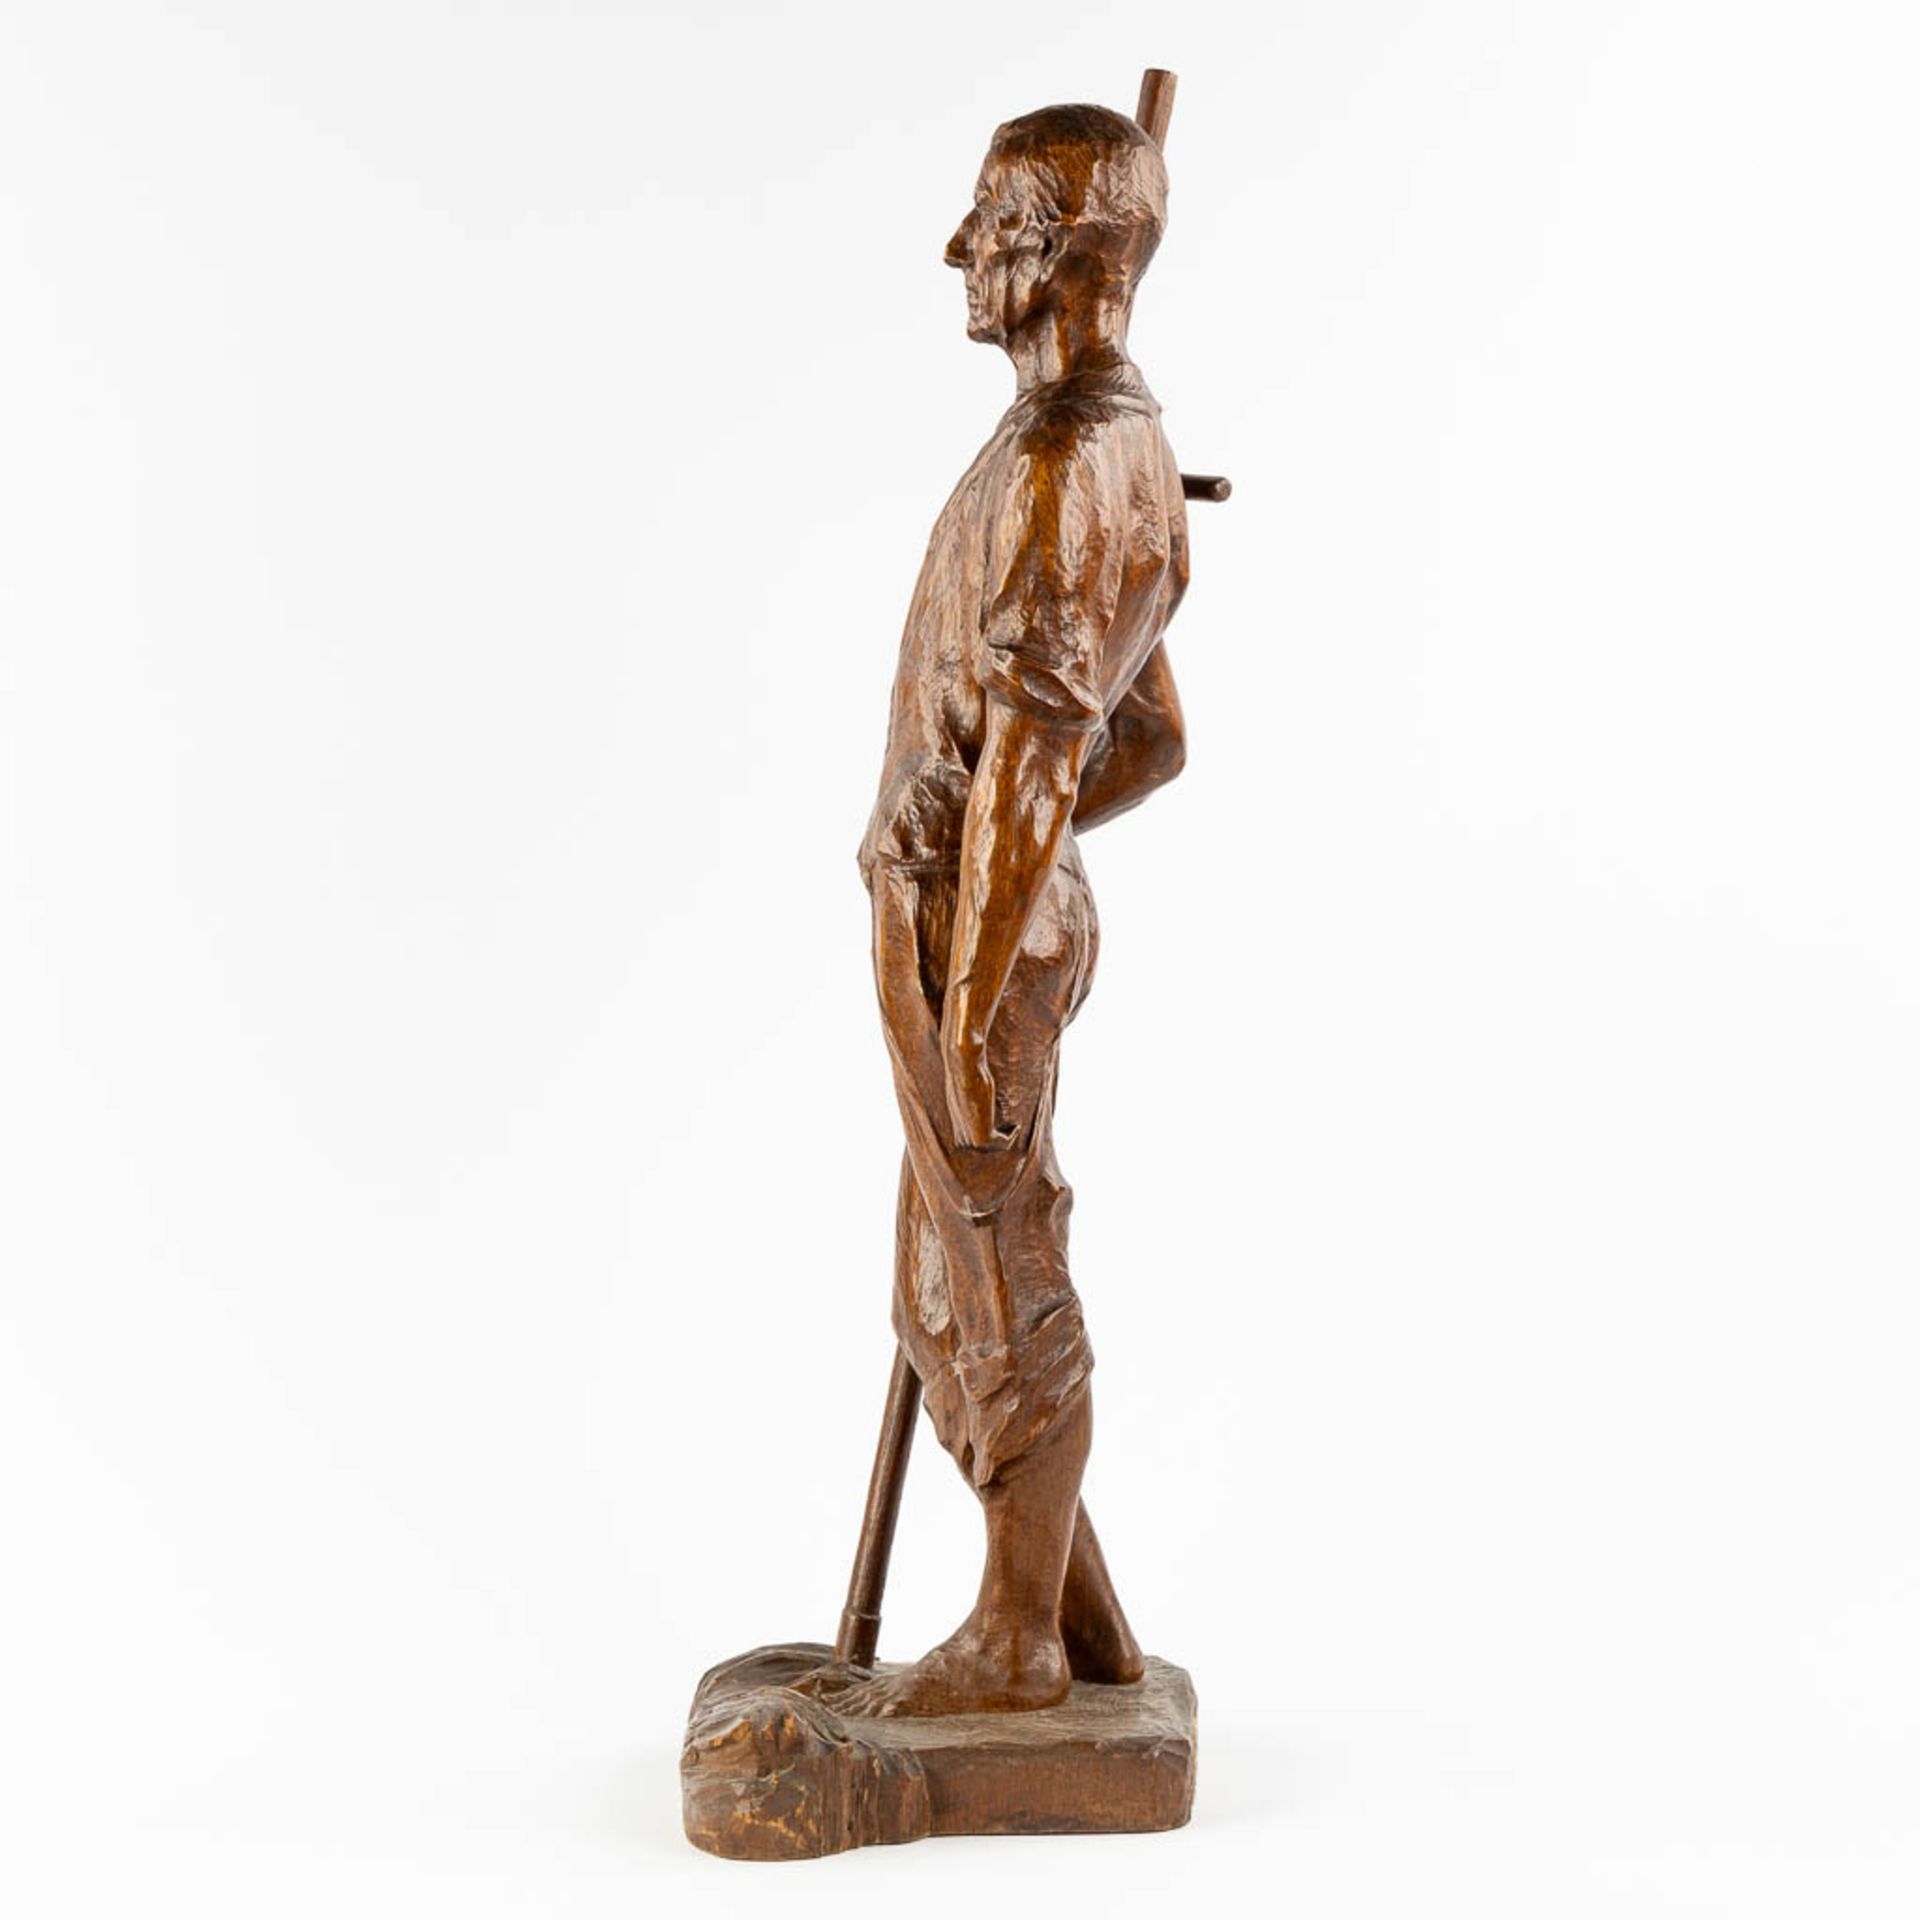 Beaudouin TUERLINCKX (1873-1945) 'Harvester with a scythe' sculptured wood. (L:27 x W:31 x H:90 cm) - Image 2 of 9